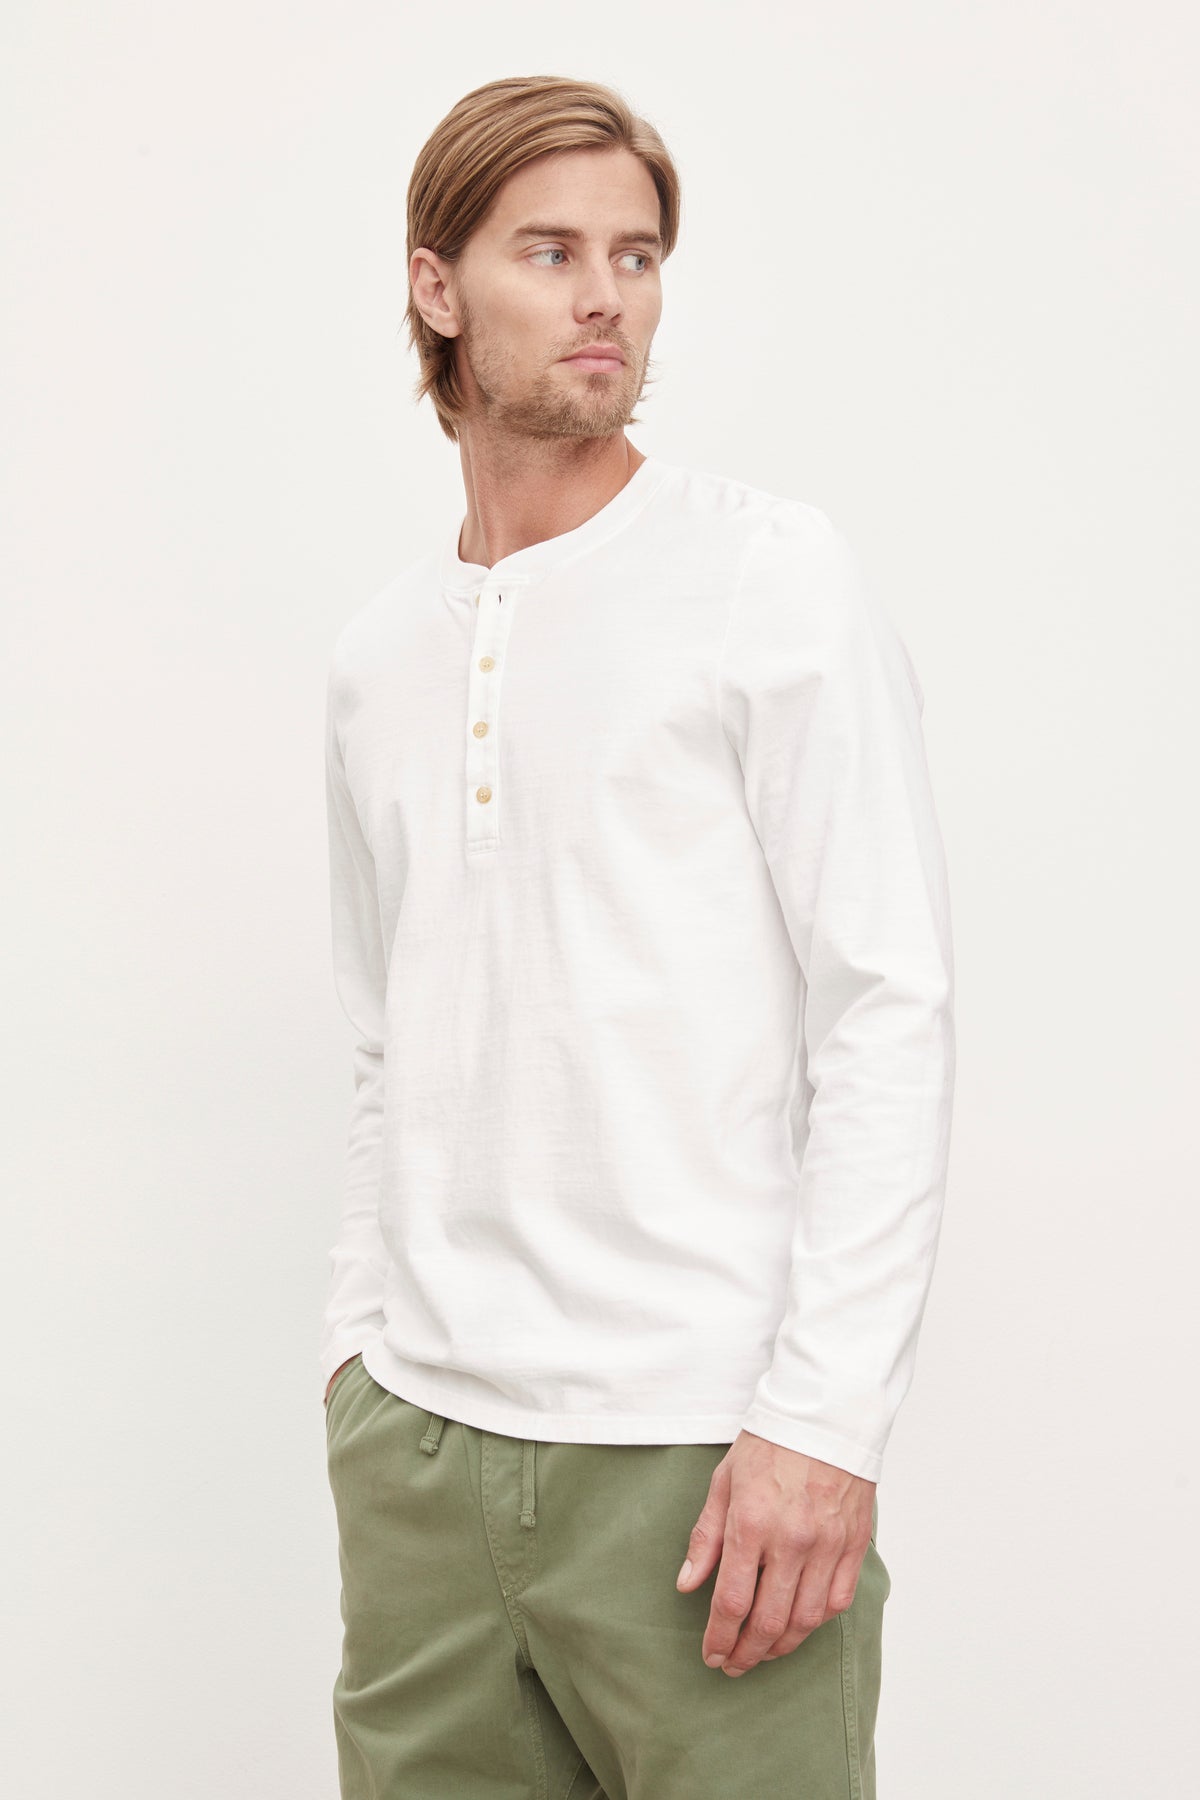 A man in a white long-sleeve cotton velvet by Graham & Spencer HOLT HENLEY shirt with a four-button placket and green pants, looking to the side against a plain background.-36009940353217